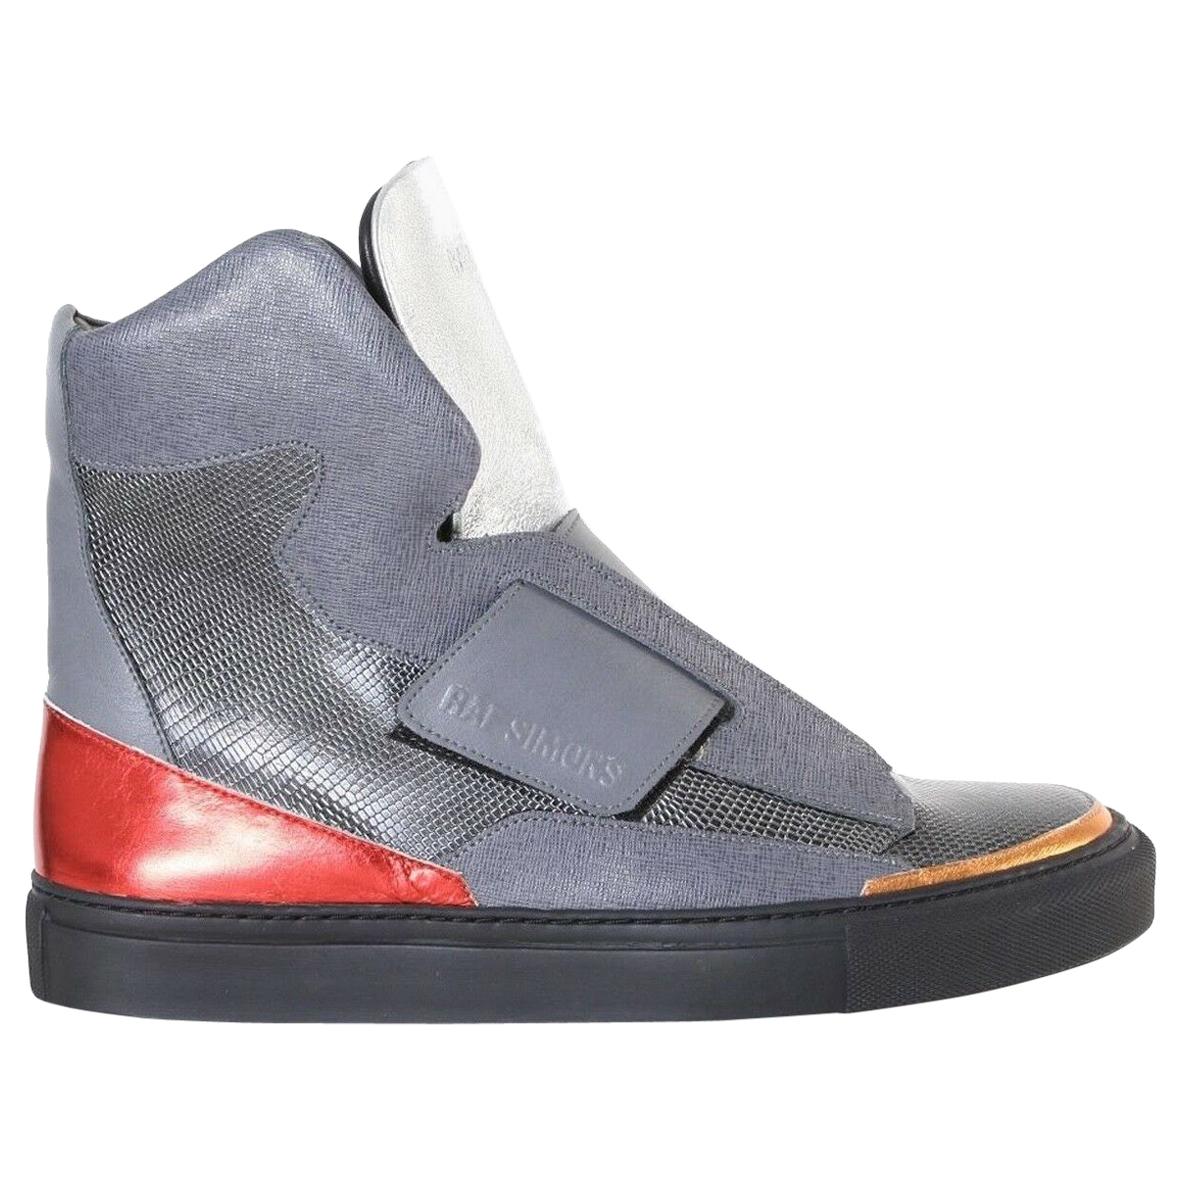 new RAF SIMONS STERLING RUBY silver strapped high top sneakers shoes EU40 US7